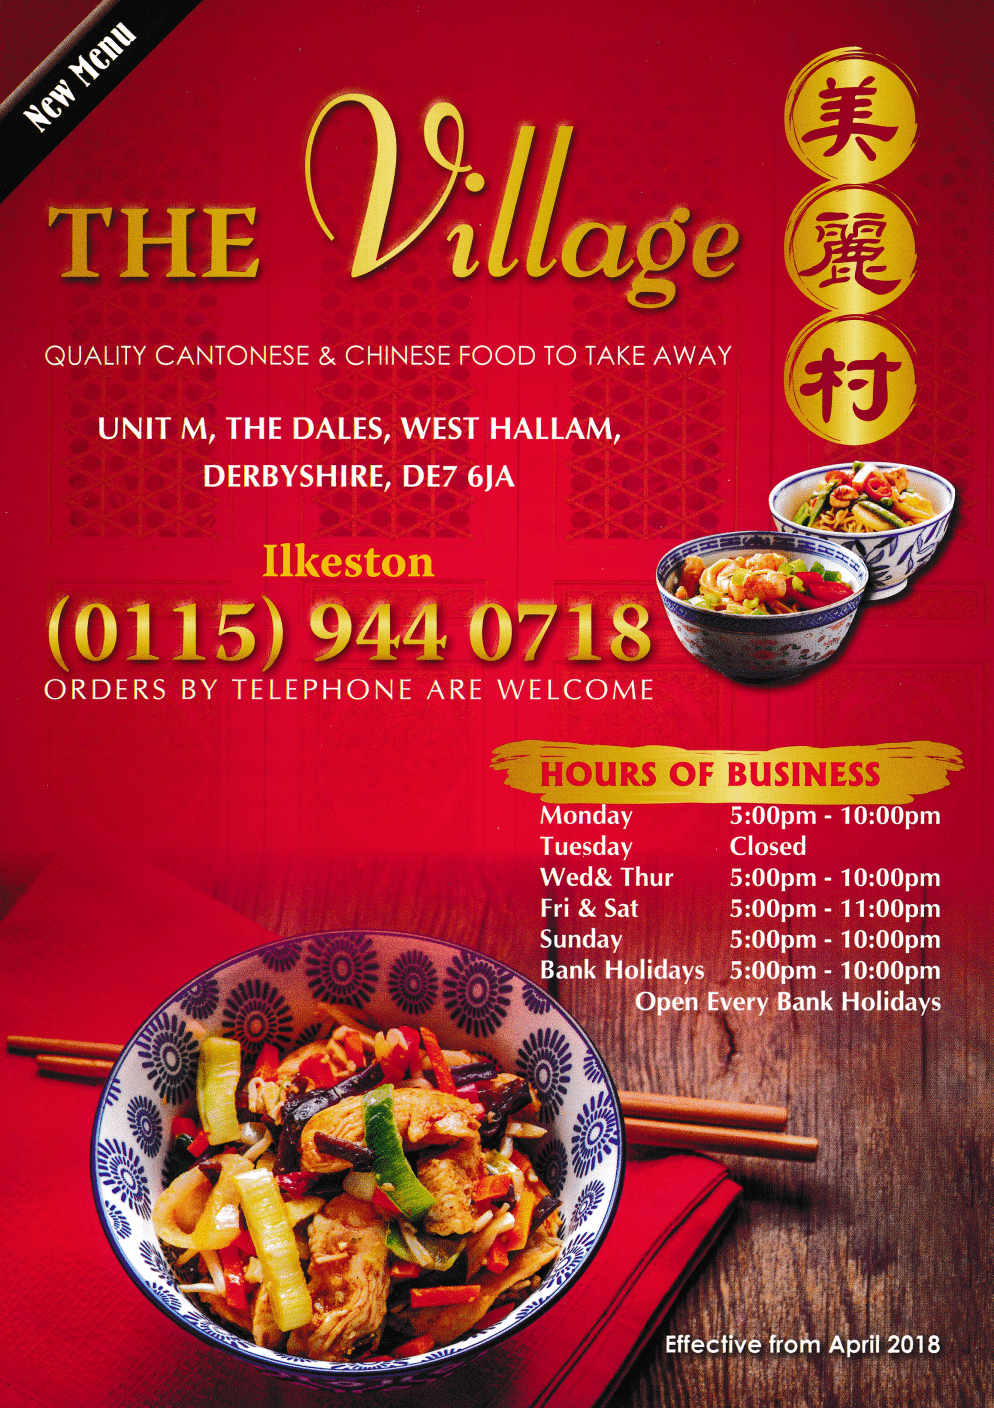 Menu for The Village Chinese and Cantonese food takeaway in West Hallam